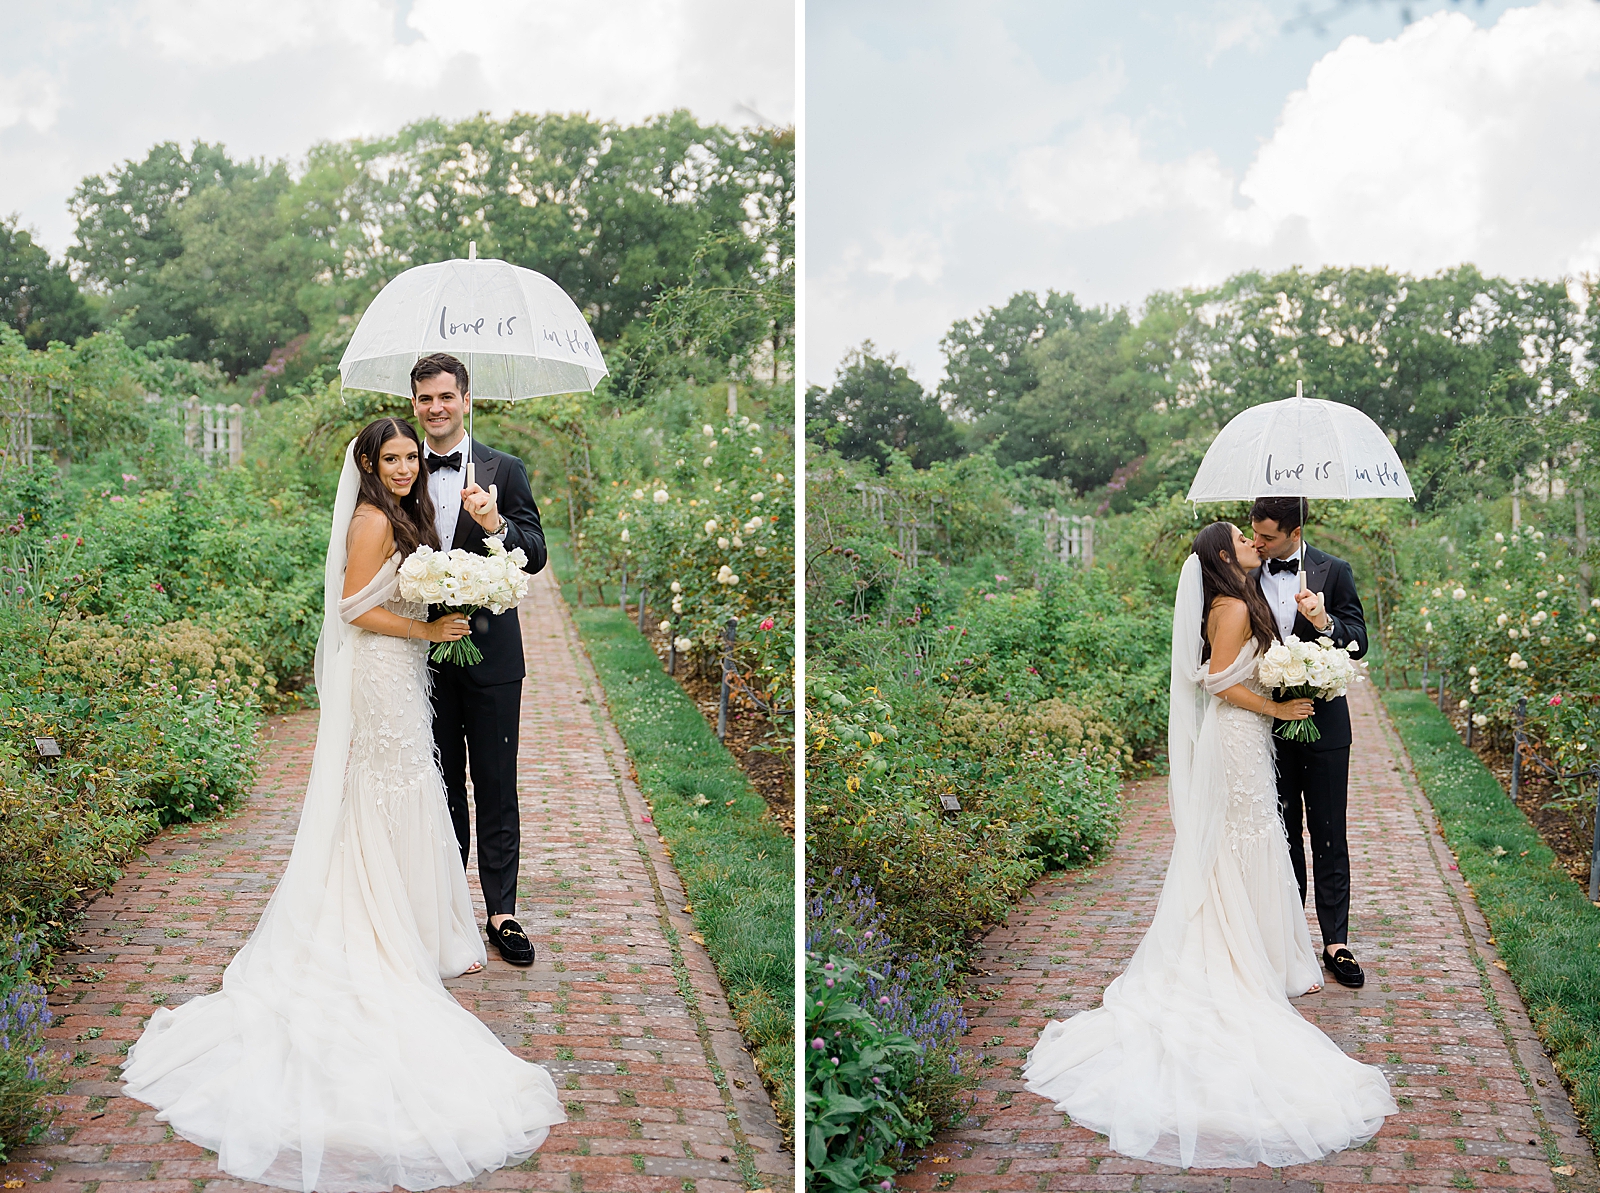 Left photo: Full body shot of the bride and groom posing in a garden while the groom holds an umbrella.
Right photo: Full body shot of the bride and groom kissing in a garden while the groom holds an umbrella. 